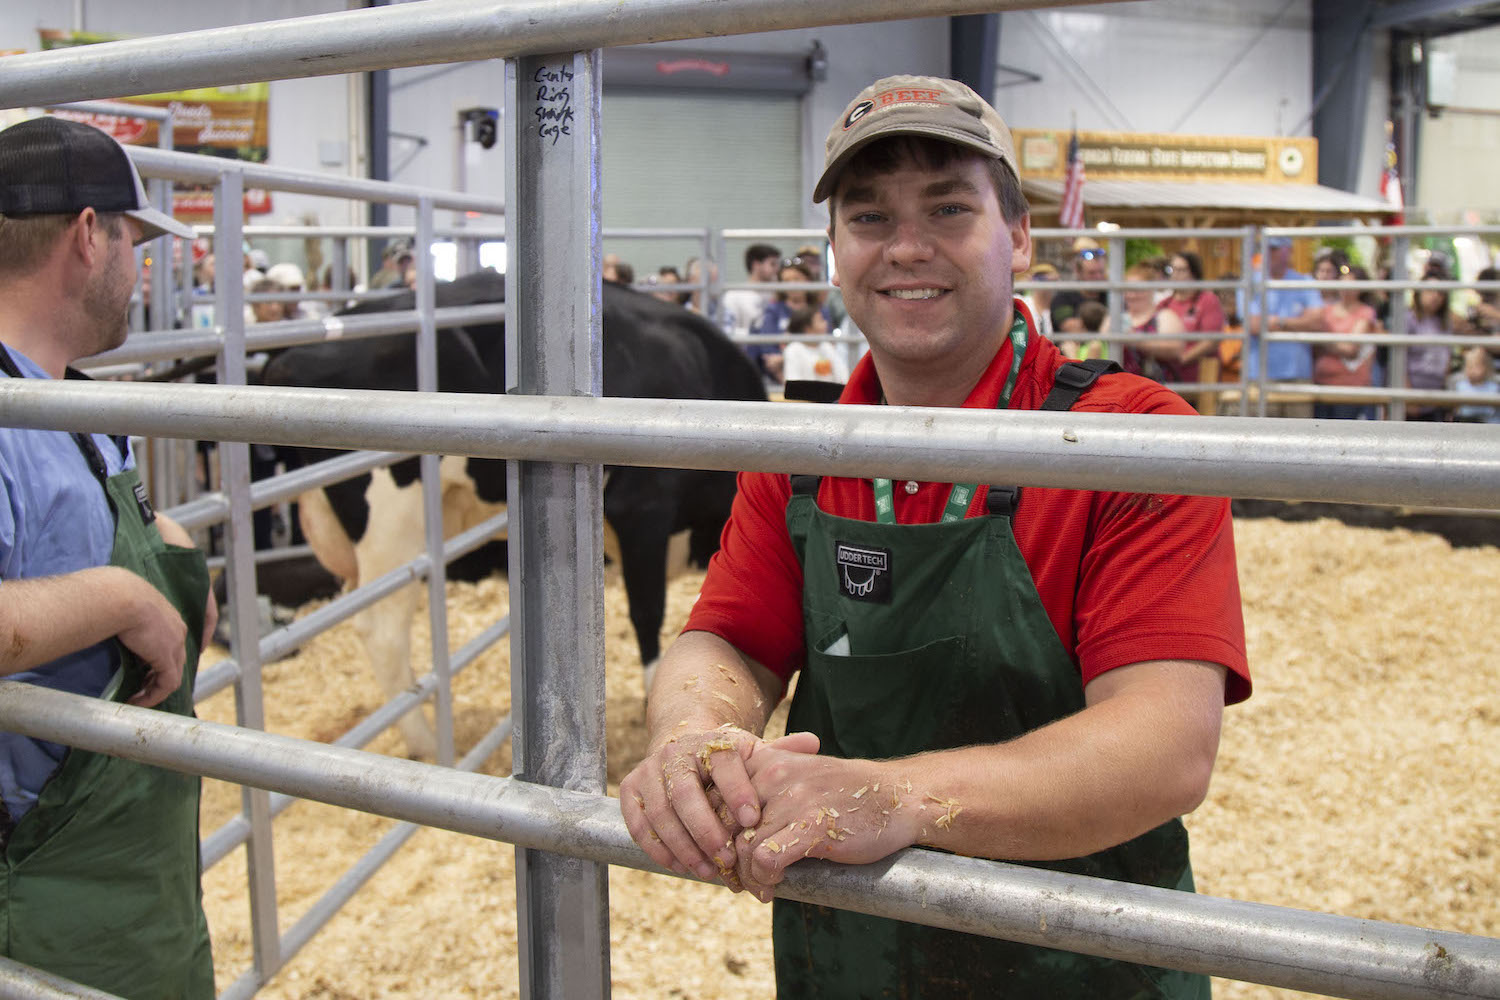 J.W. Gentry (DVM, 2023) takes his learning home to assist food animal producers